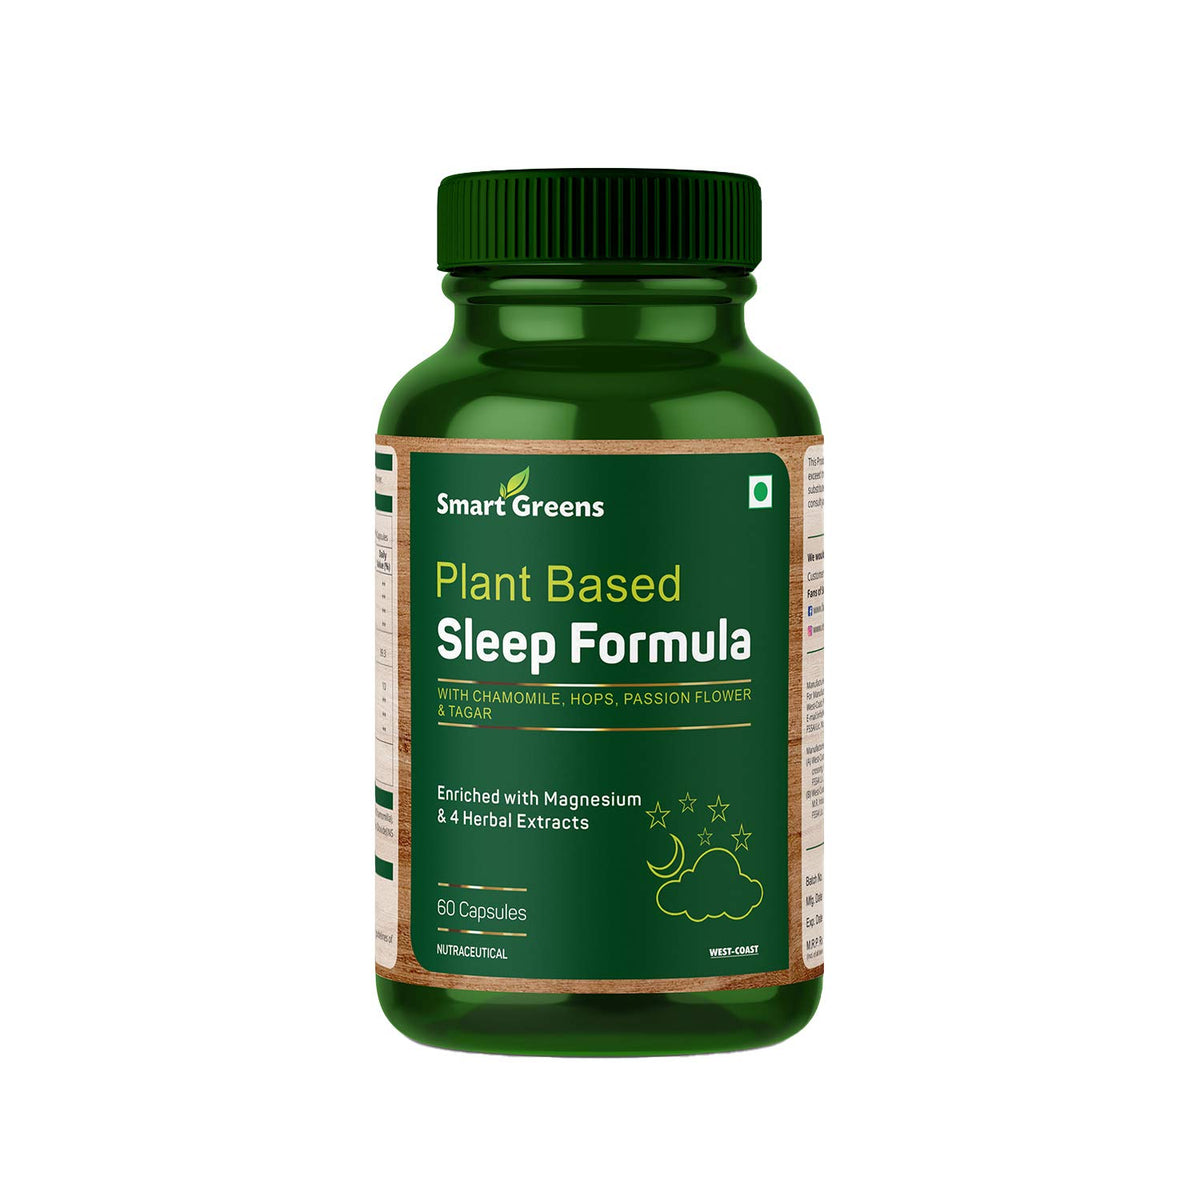 Smart Greens Plant Based Sleep Formula with Chamomile, Hops, Passion Flower & Tagar Enriched with Magnesium & 5 Herbal Extracts – 60 Capsules